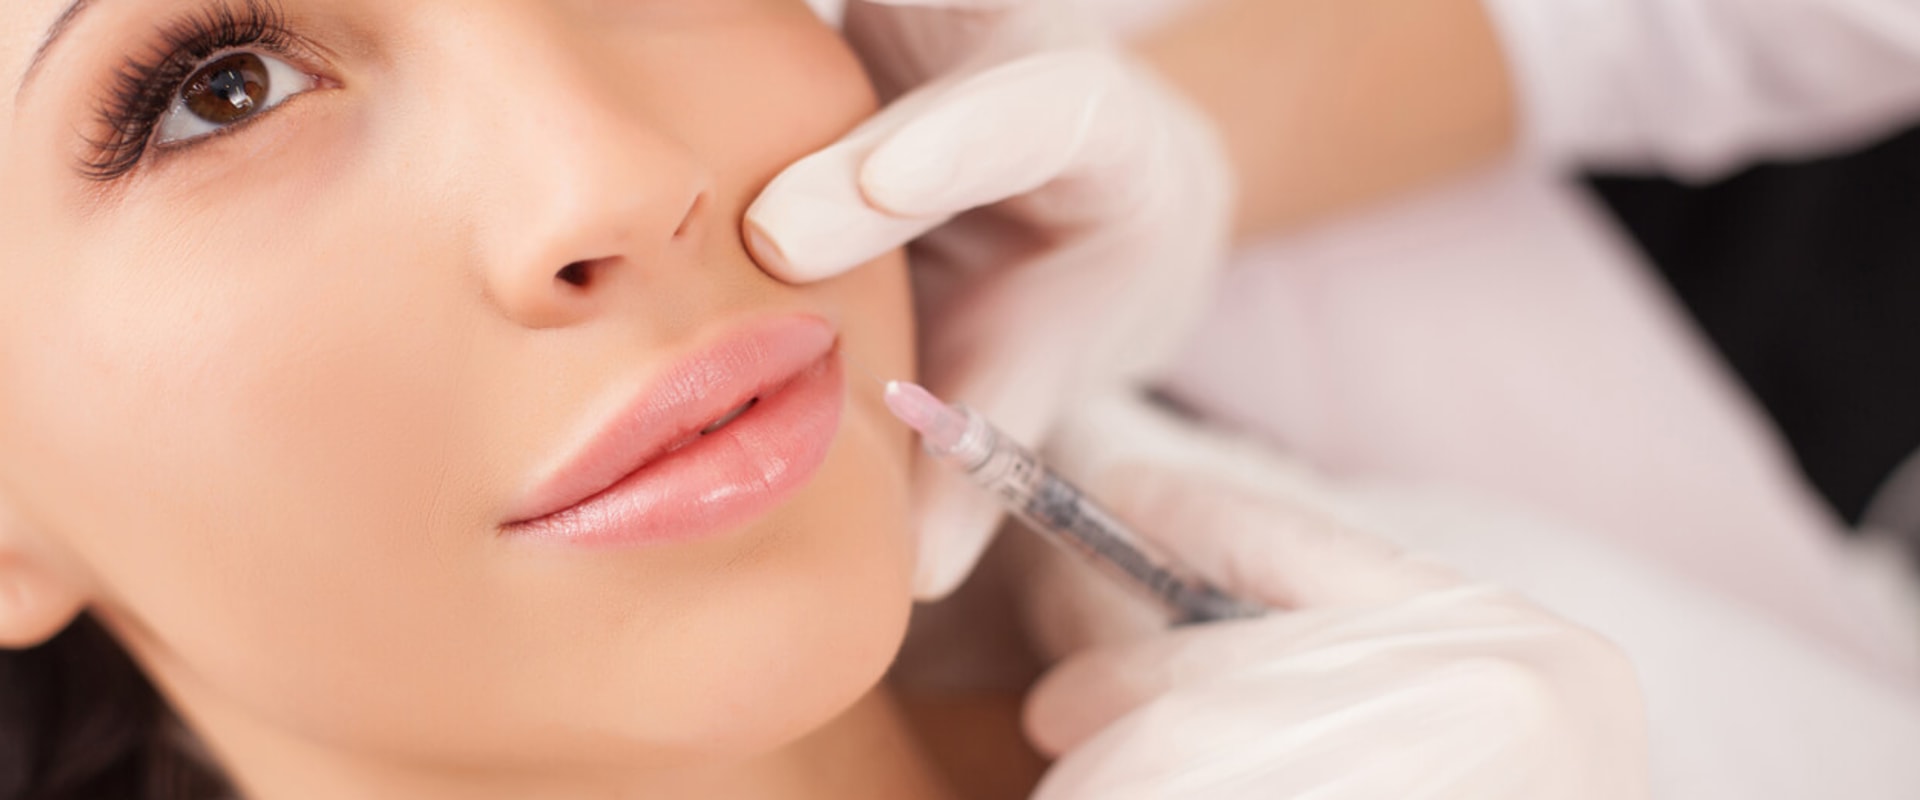 What lasts longer fillers or botox?